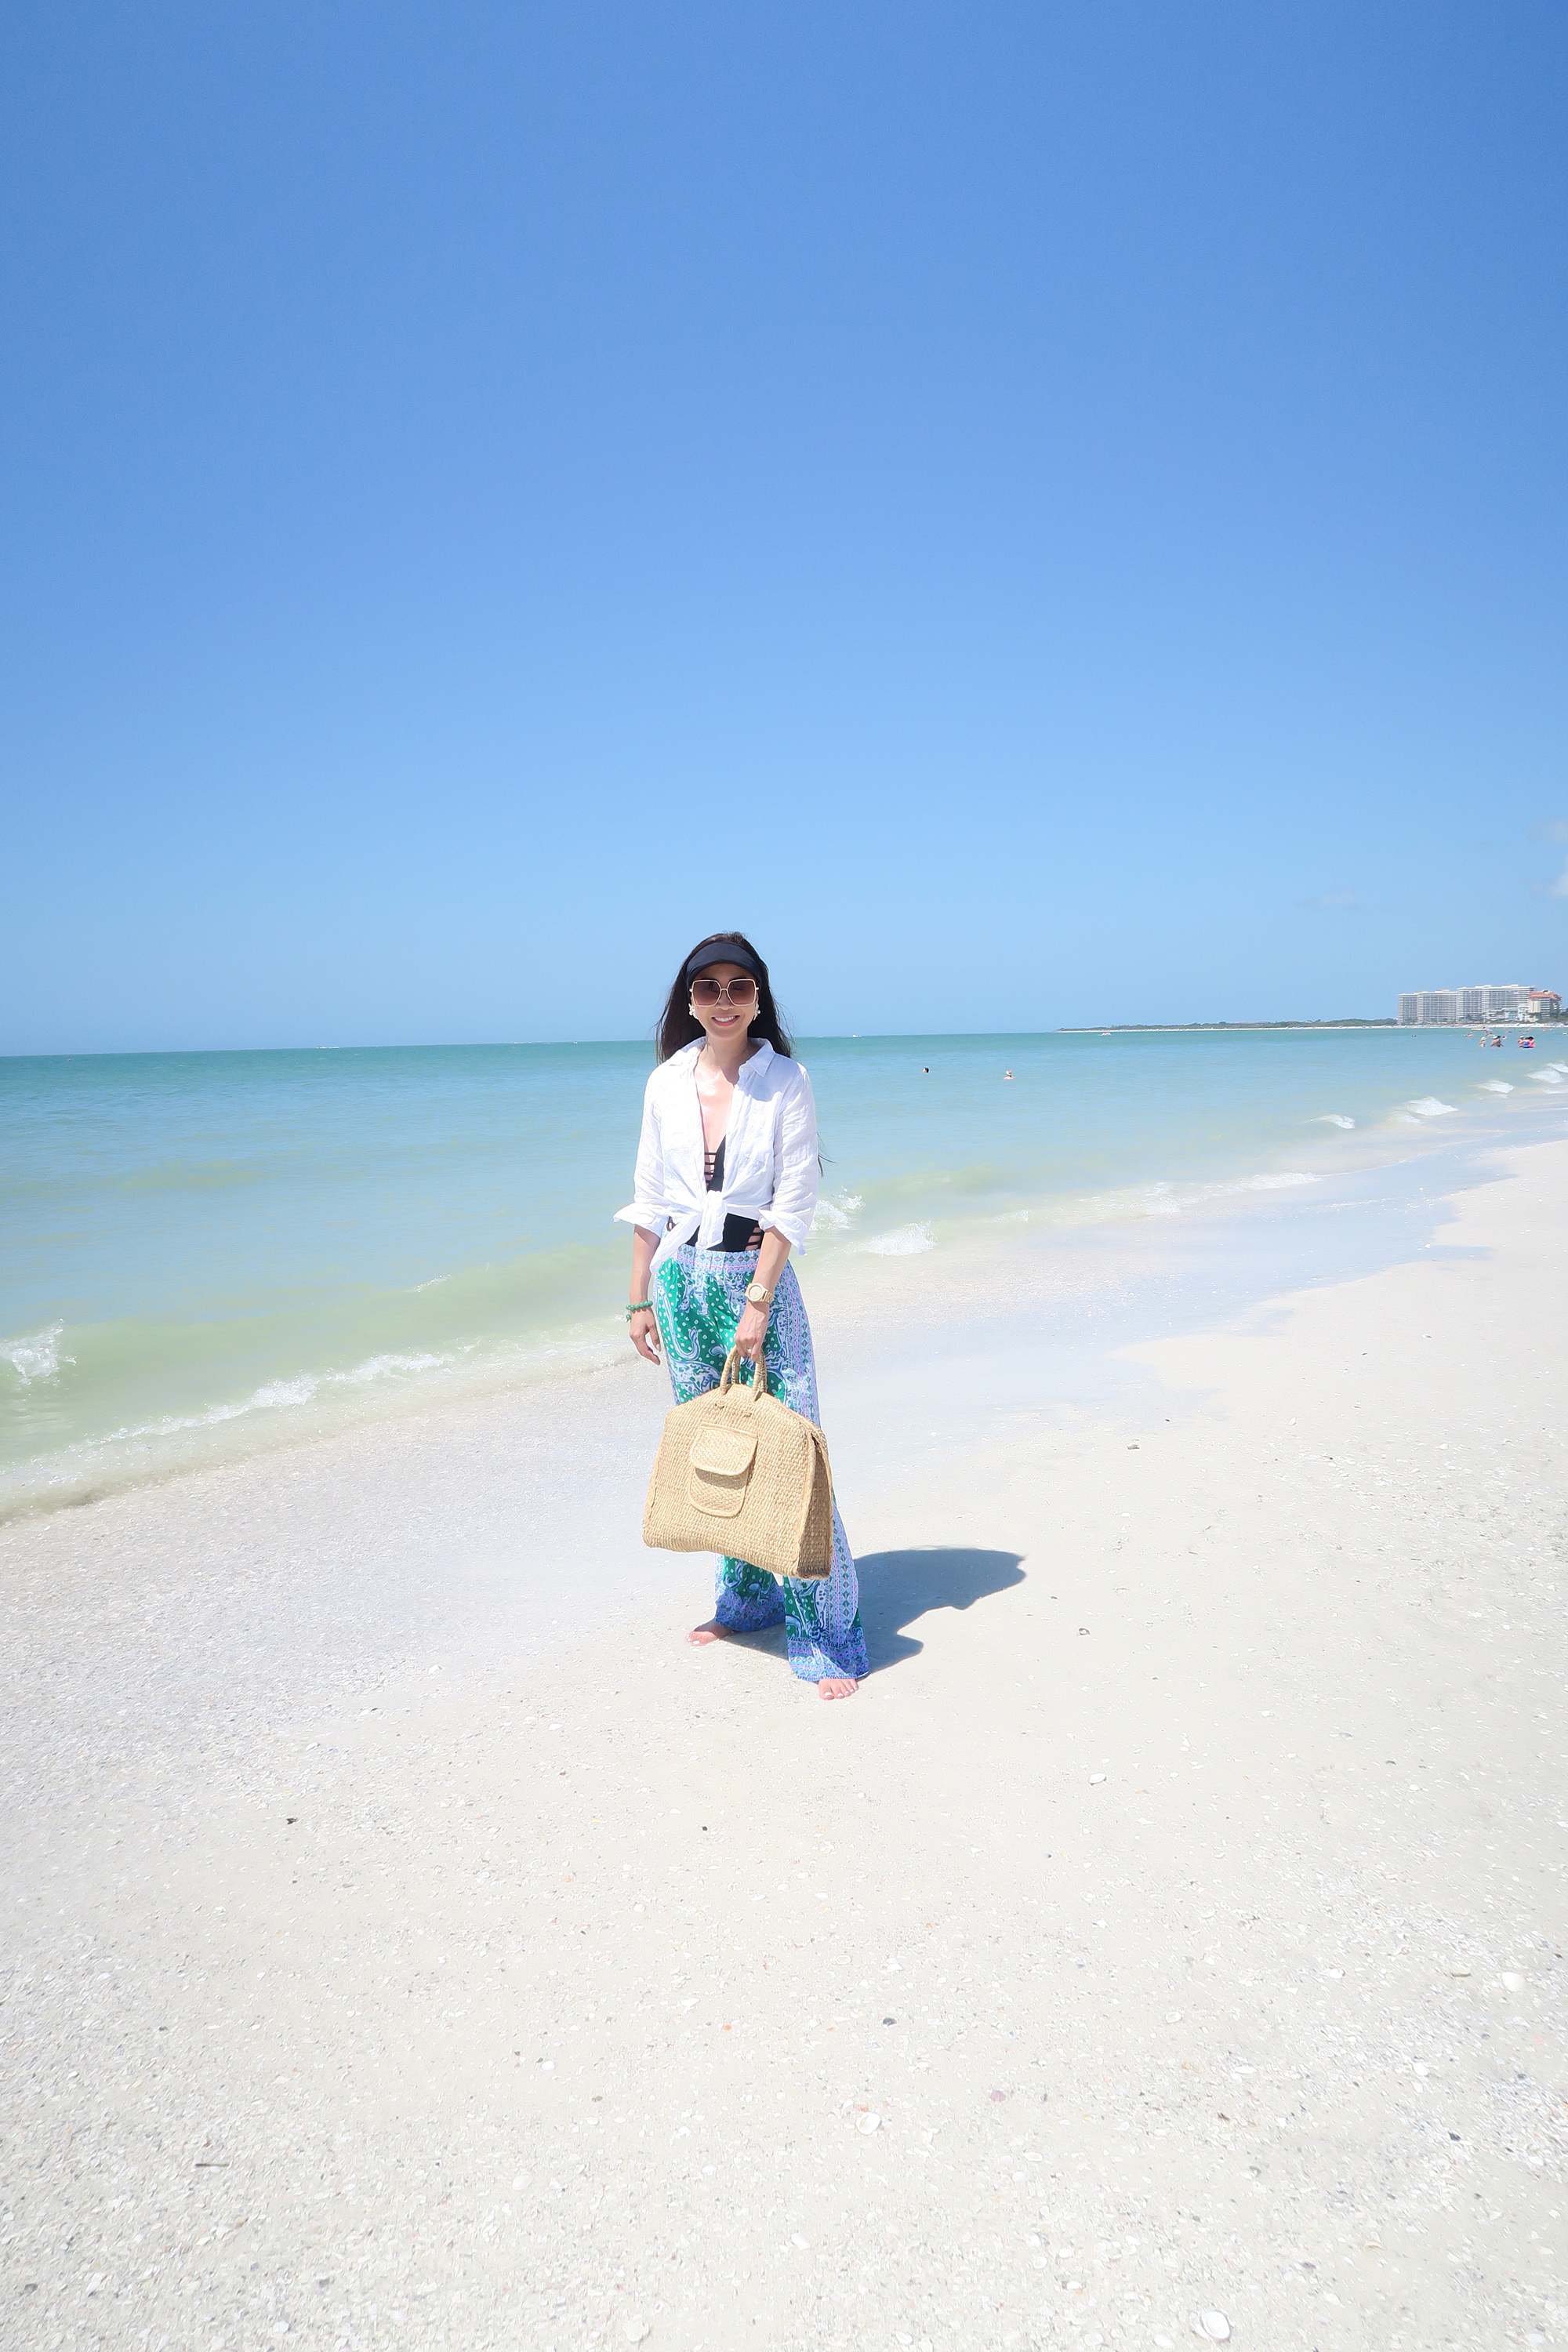 Marco Island Florida trip tips and where to go and things to do 